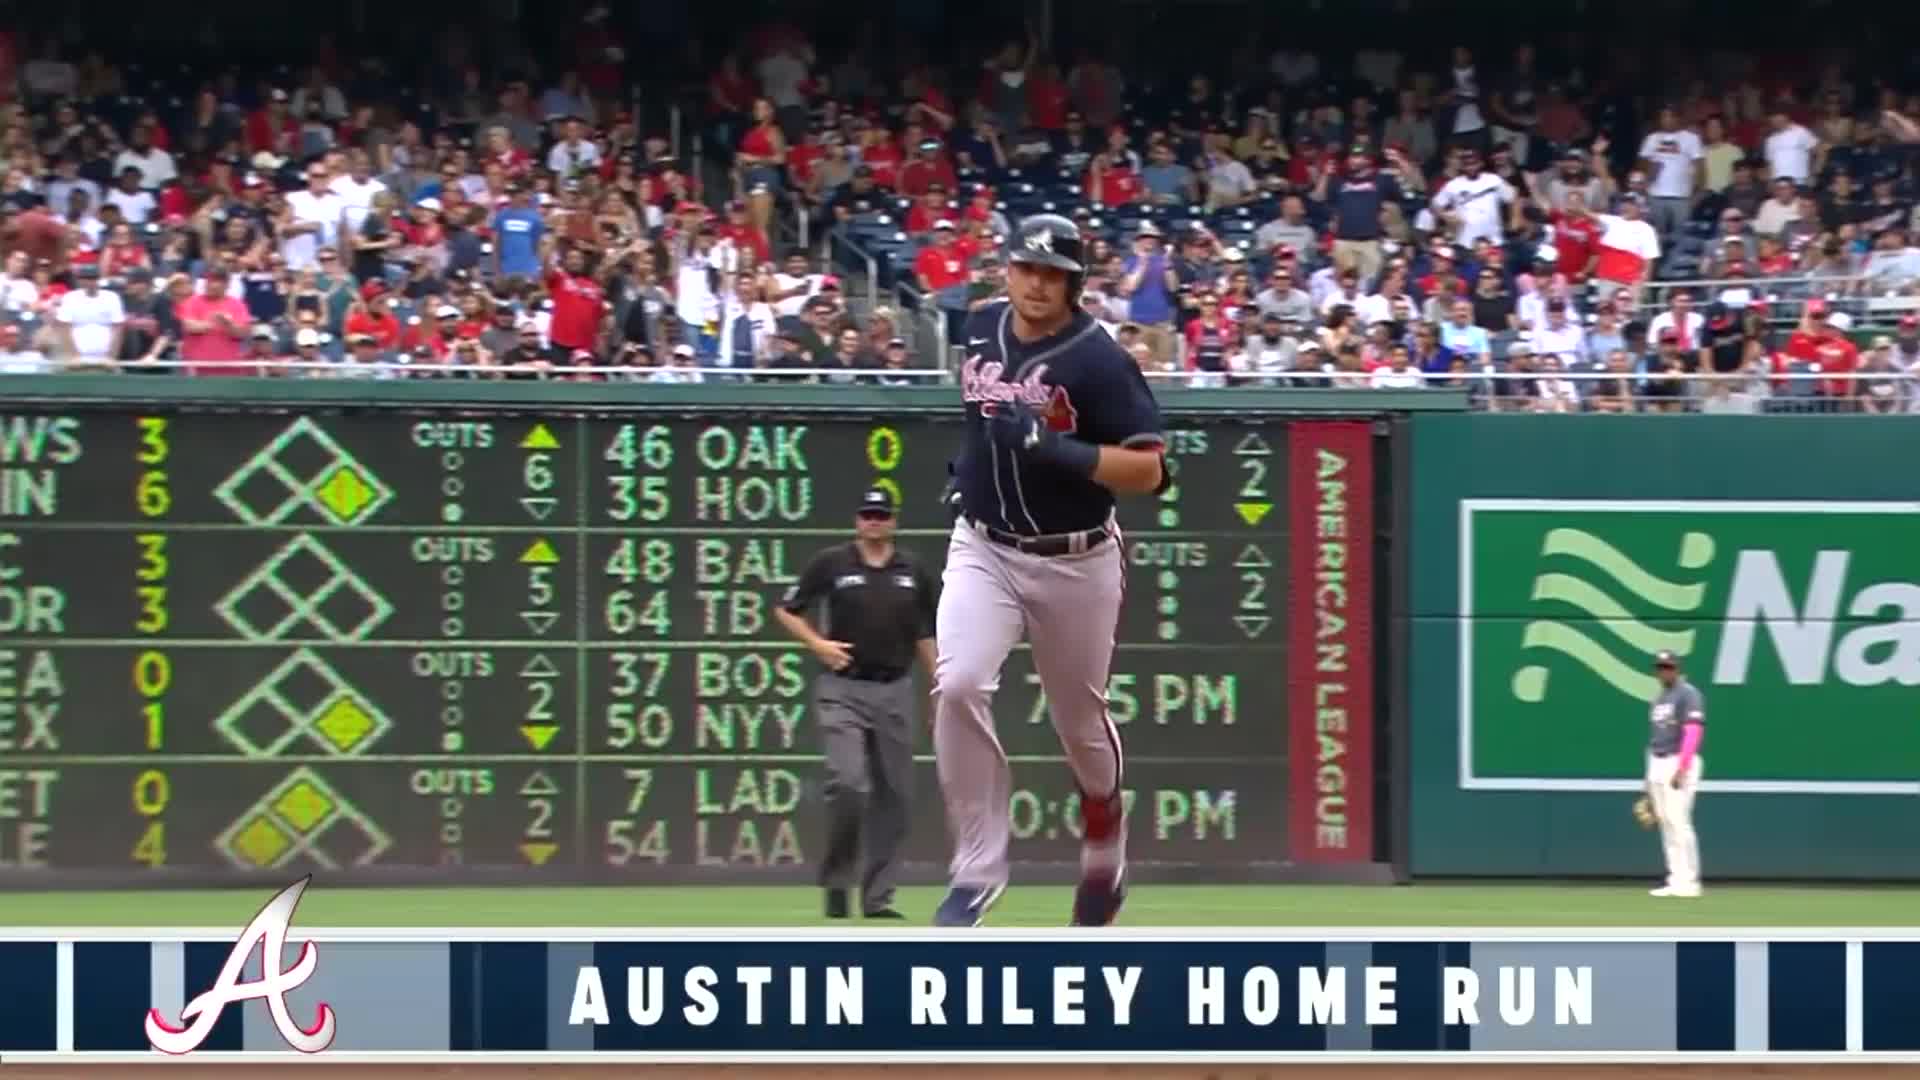 Highlight] NL All-Star, Austin Riley, goes back-to-back with Matt